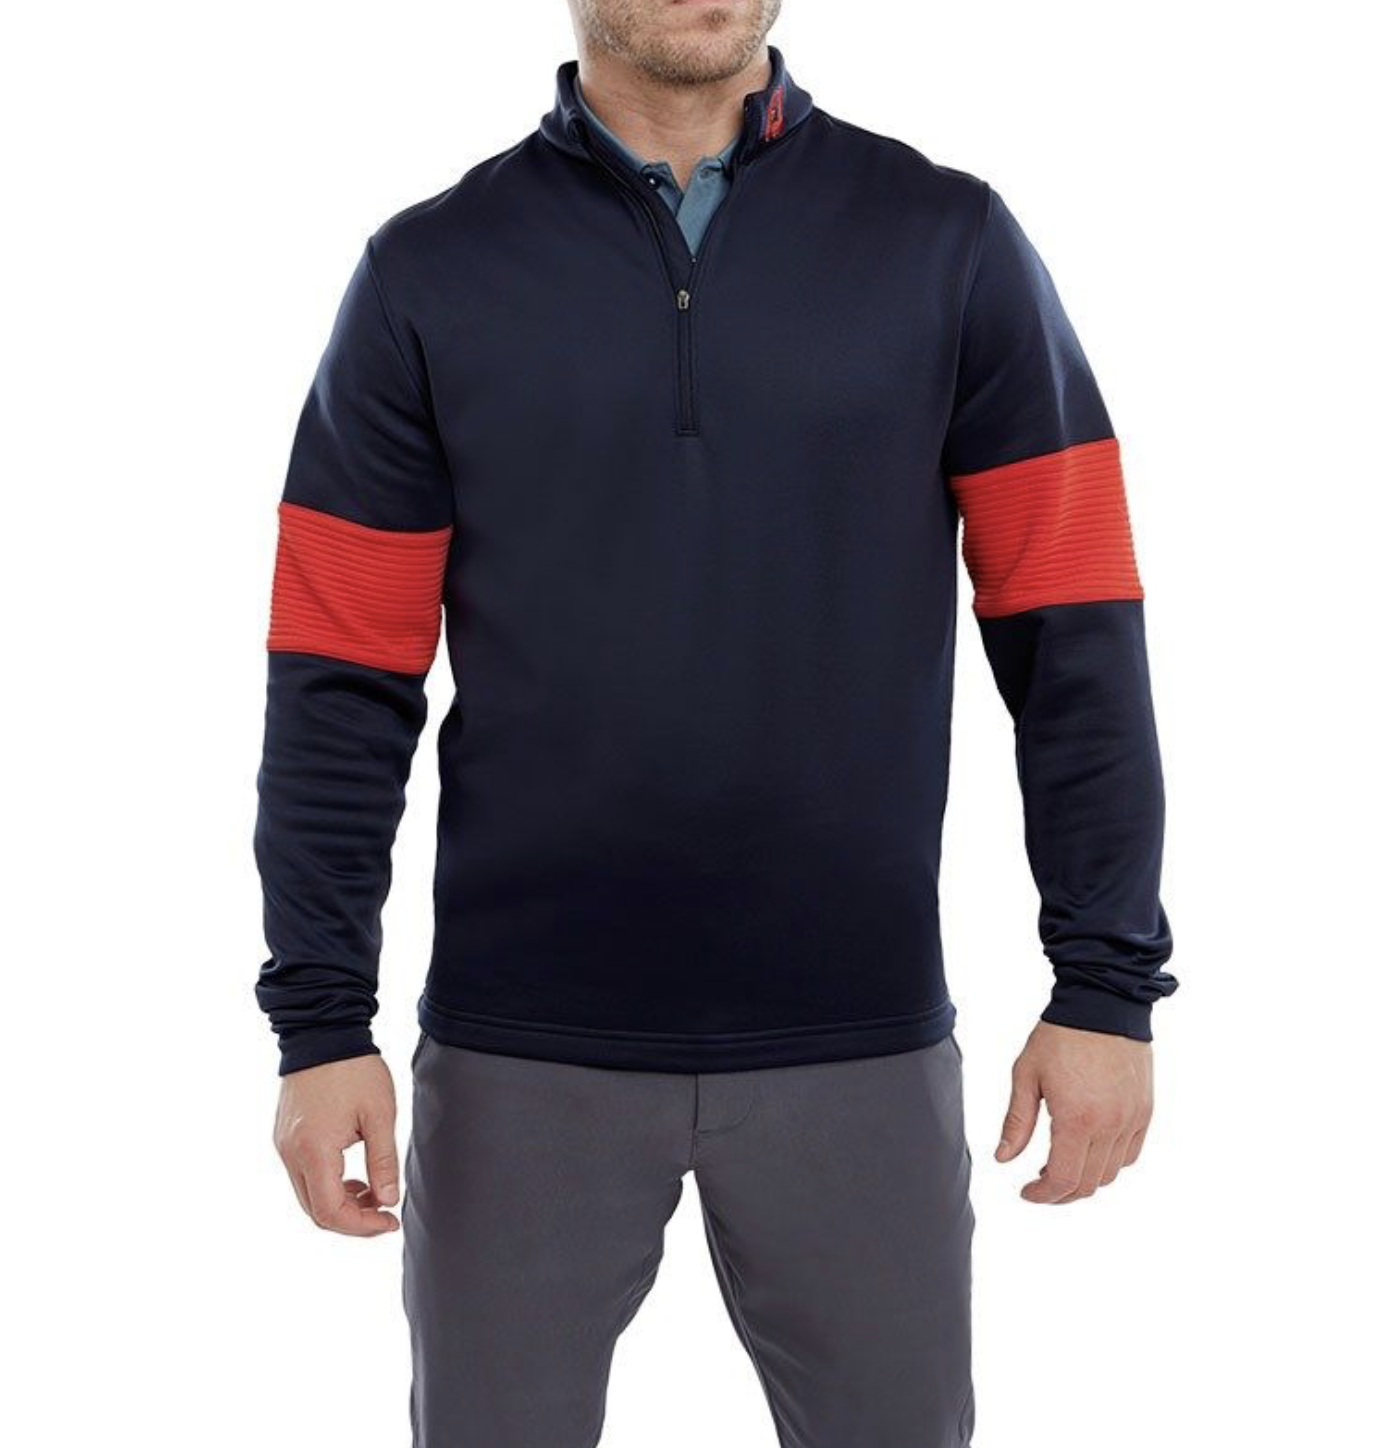 Footjoy | 88831 | Ribbed Chillout XP | Navy / Bright Red